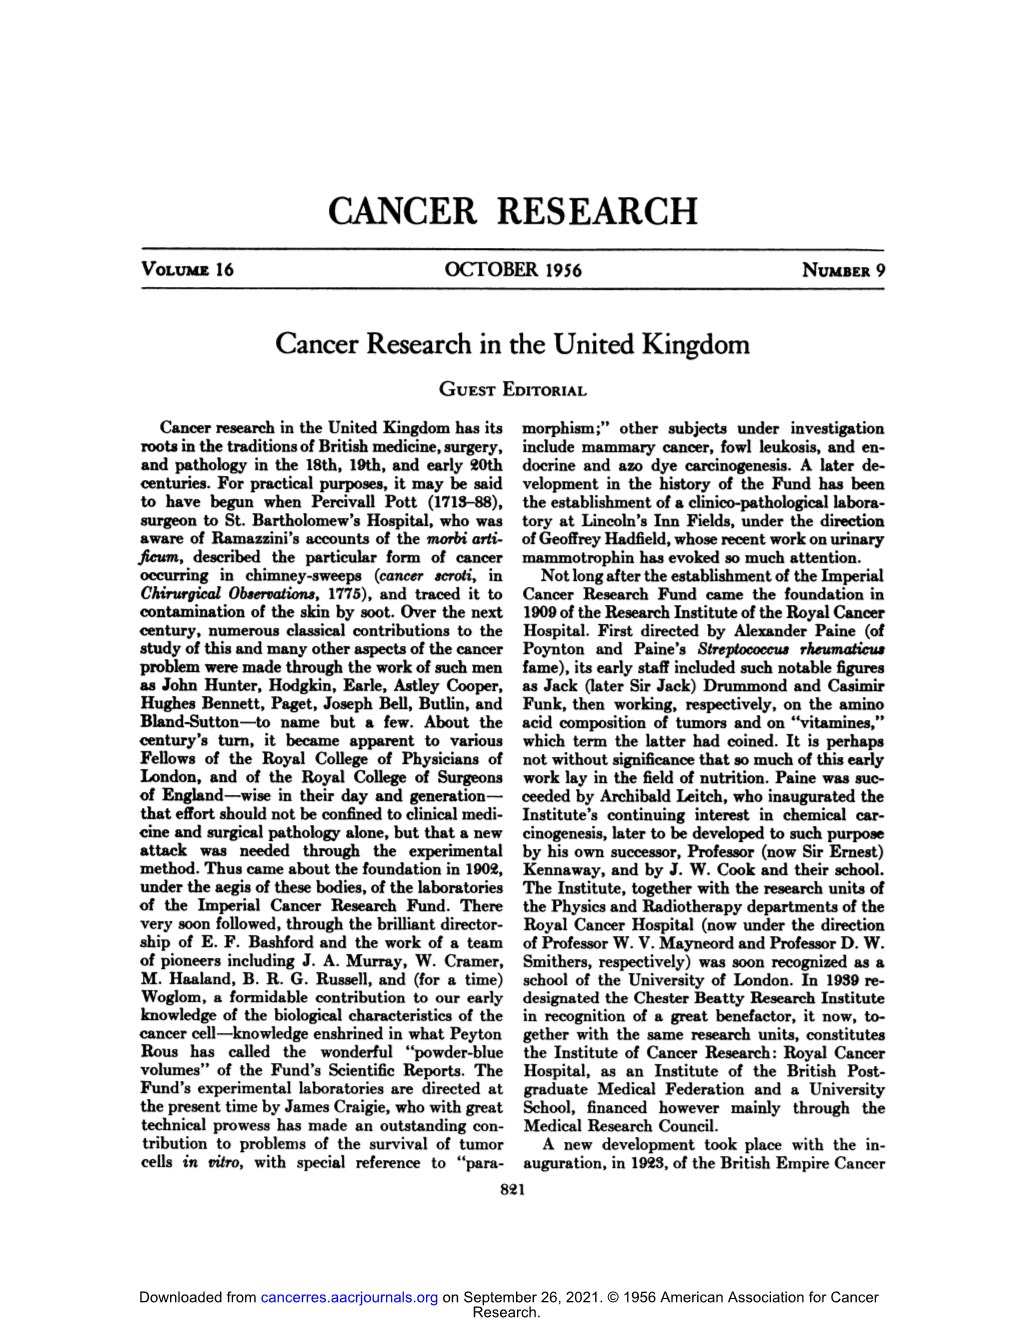 Cancer Research in the United Kingdom: Guest Editorial